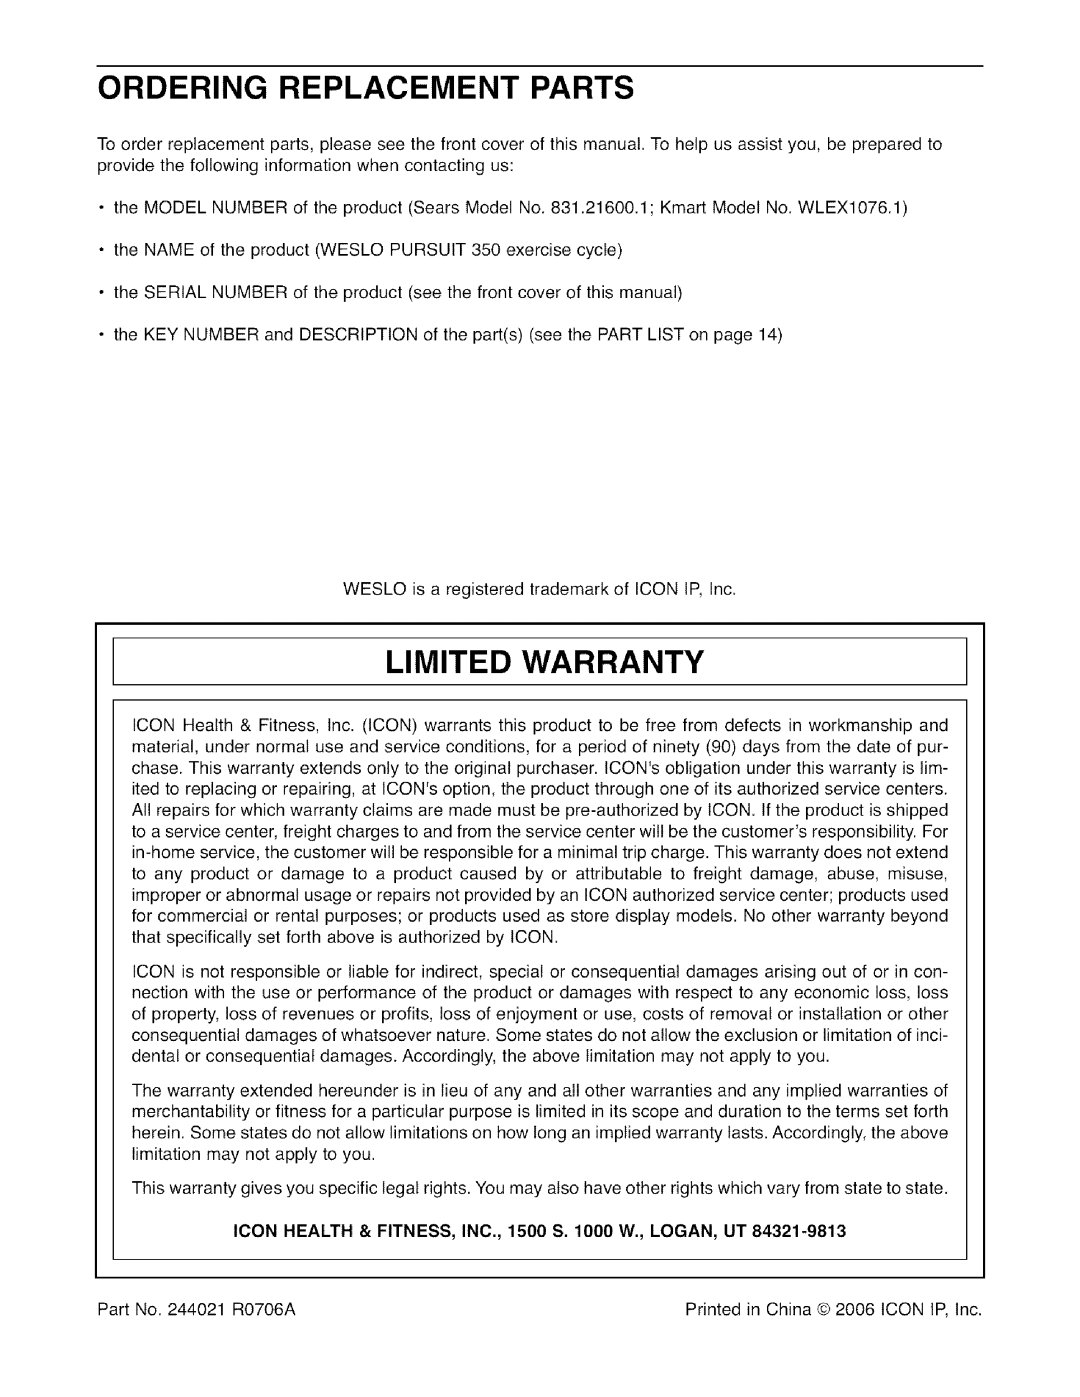 Weslo WLEX1076.1 Ordering Replacement Parts, Limited Warranty, ICON HEALTH & FITNESS, INC., 1500 S. 1000 W., LOGAN, UT 